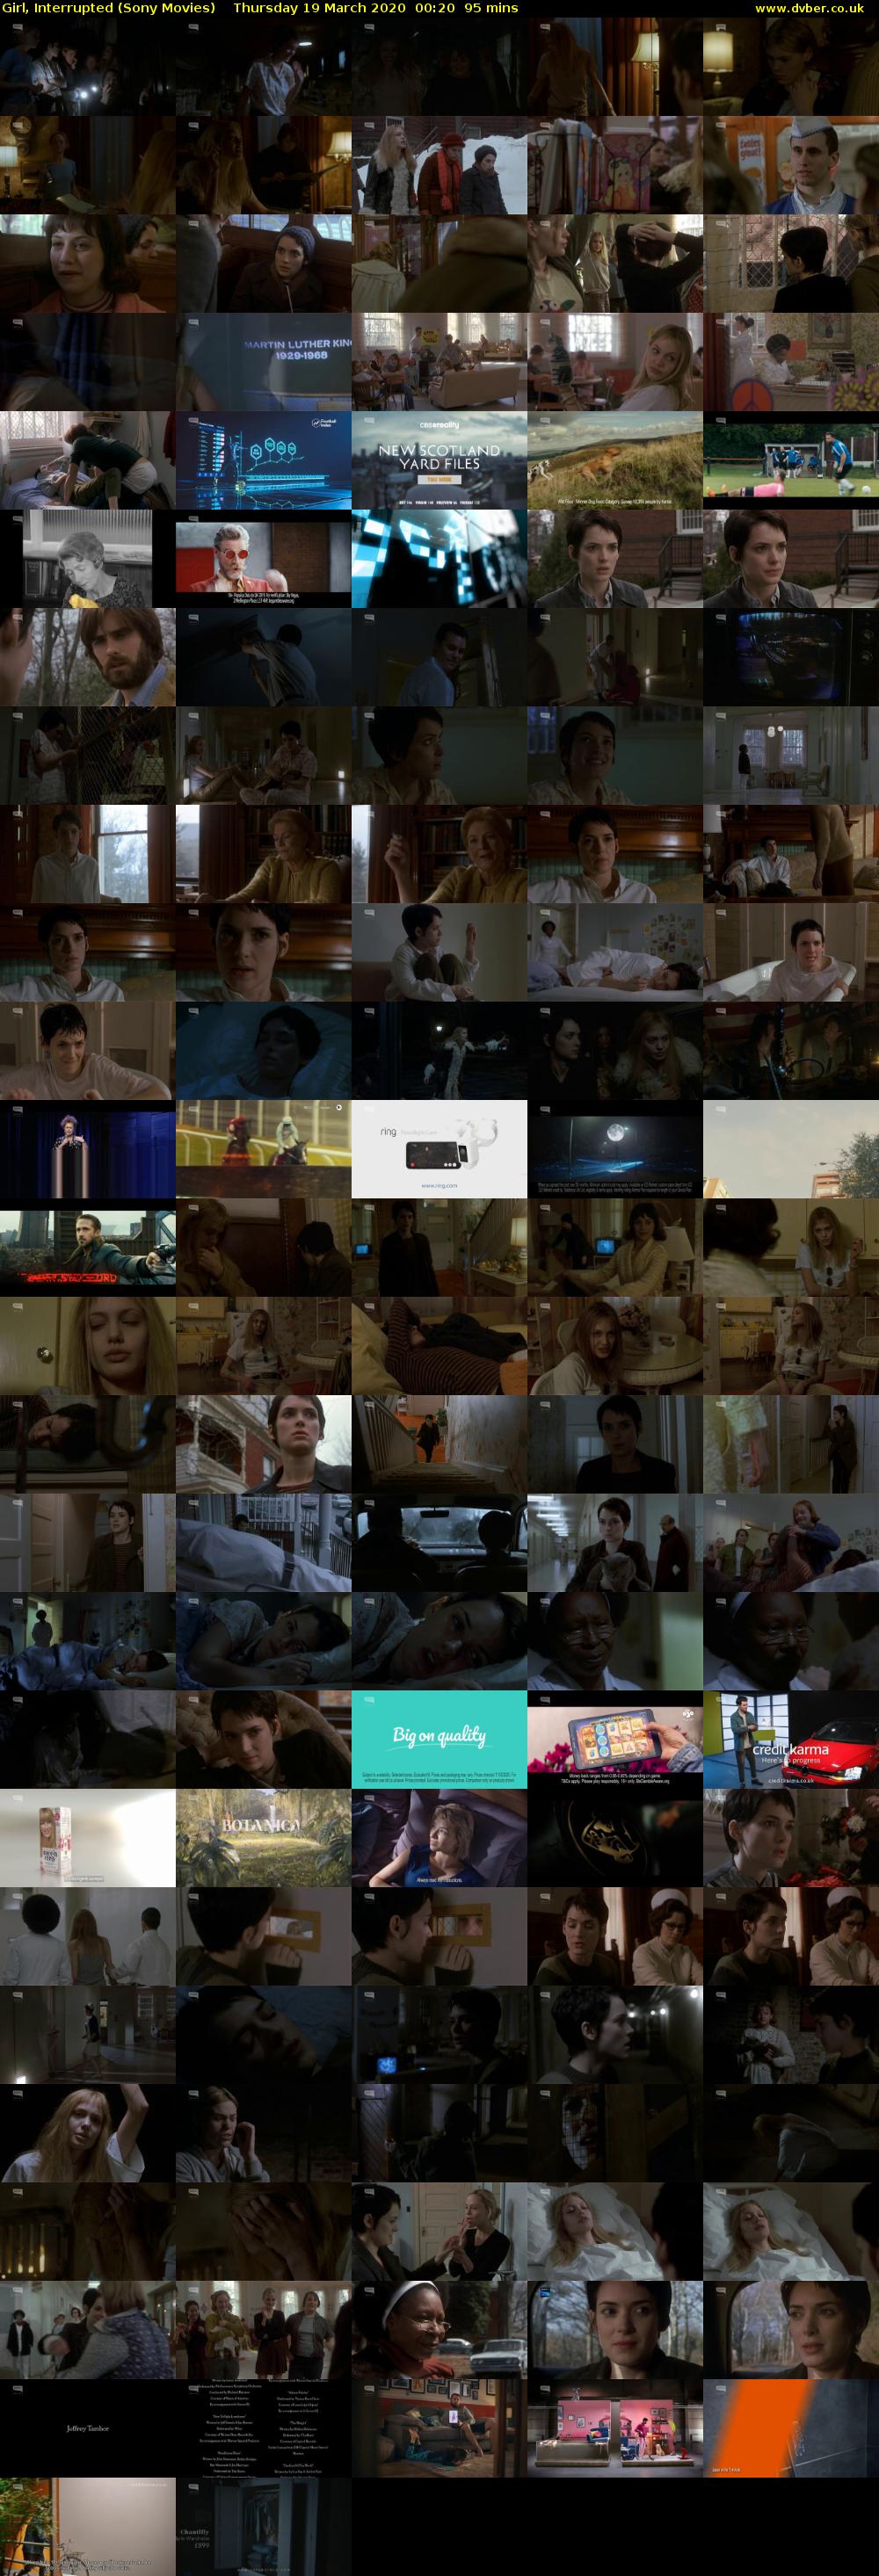 Girl, Interrupted (Sony Movies) Thursday 19 March 2020 00:20 - 01:55